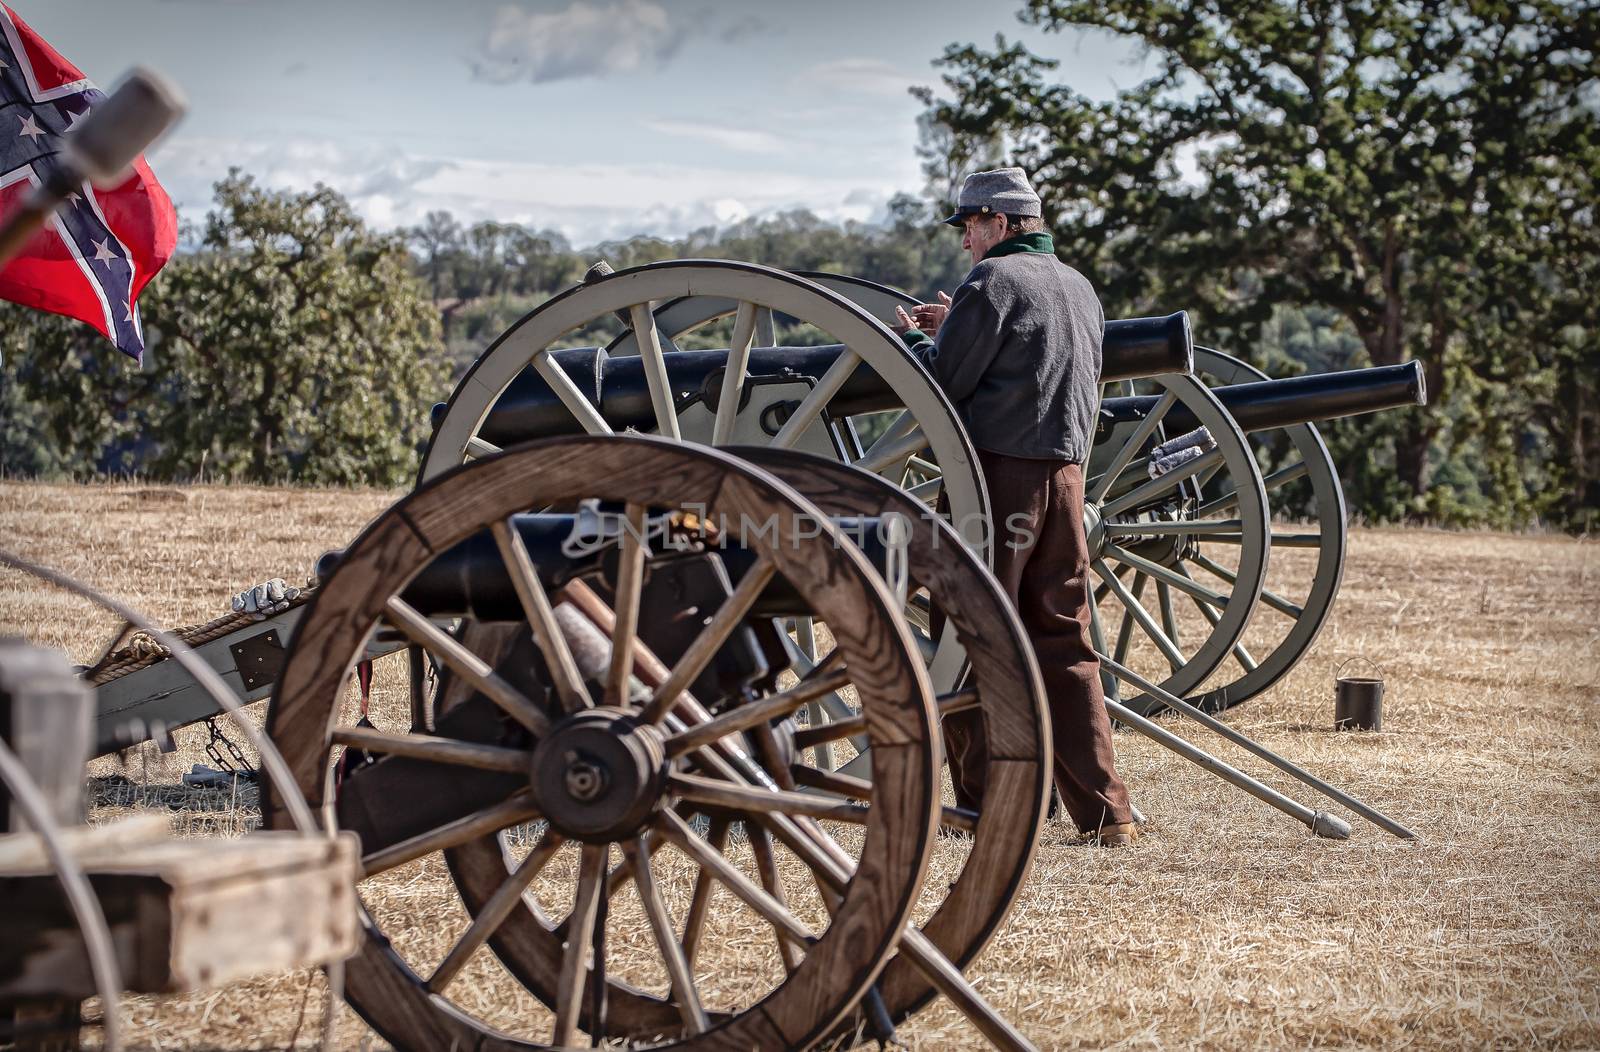 A Confederate Civil War reenactor inspects the artillery battery at the Hawes Farm Civil War Reenactment in Anderson, California. Photo taken September 27, 2014.